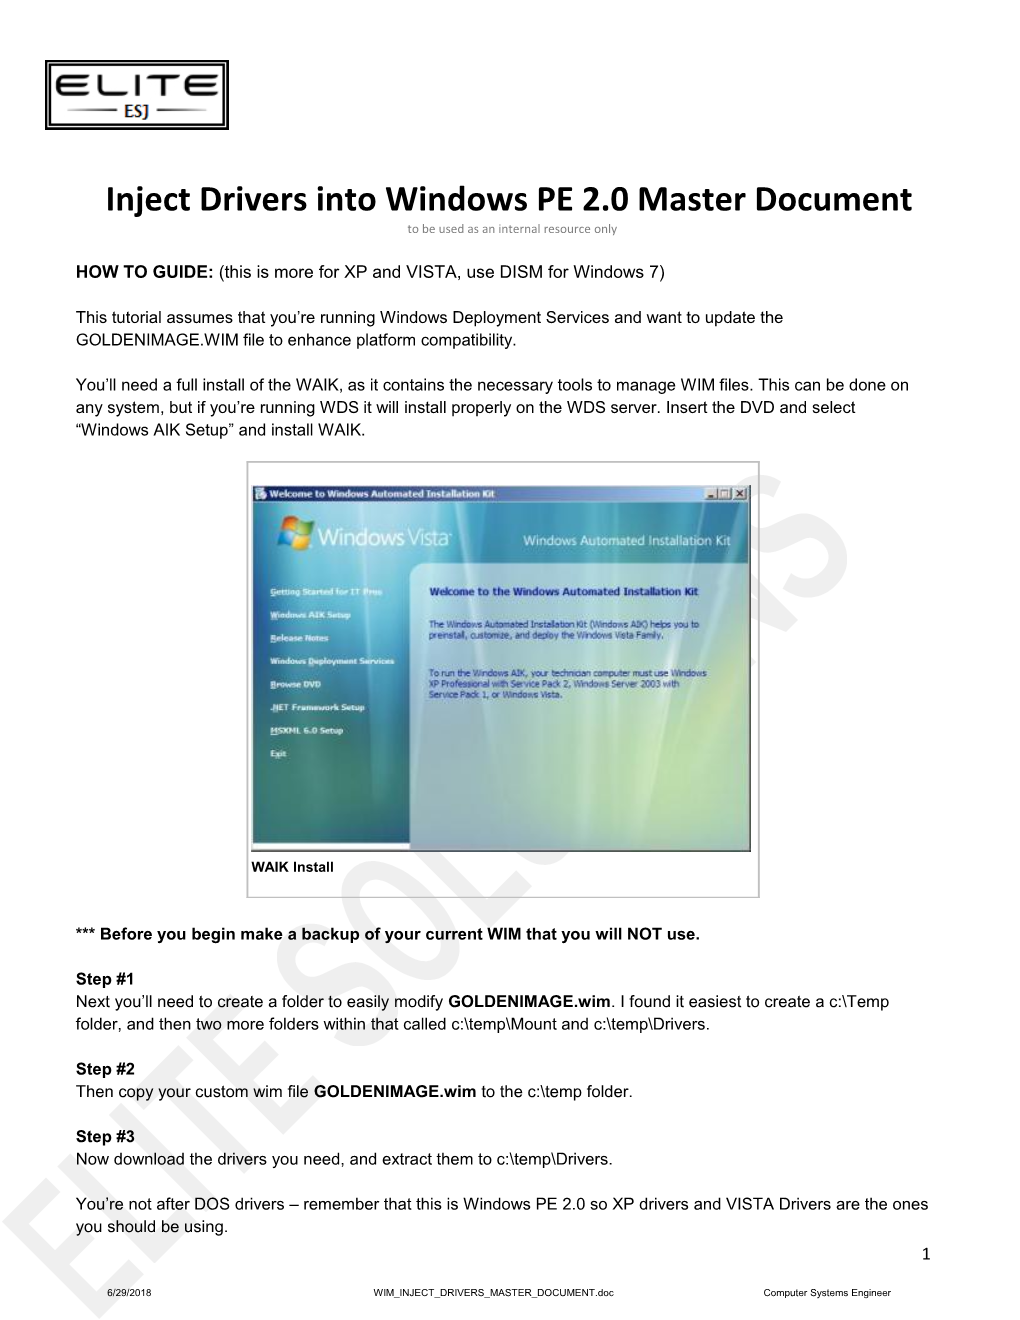 Inject Drivers Into Windows PE 2.0 Master Document